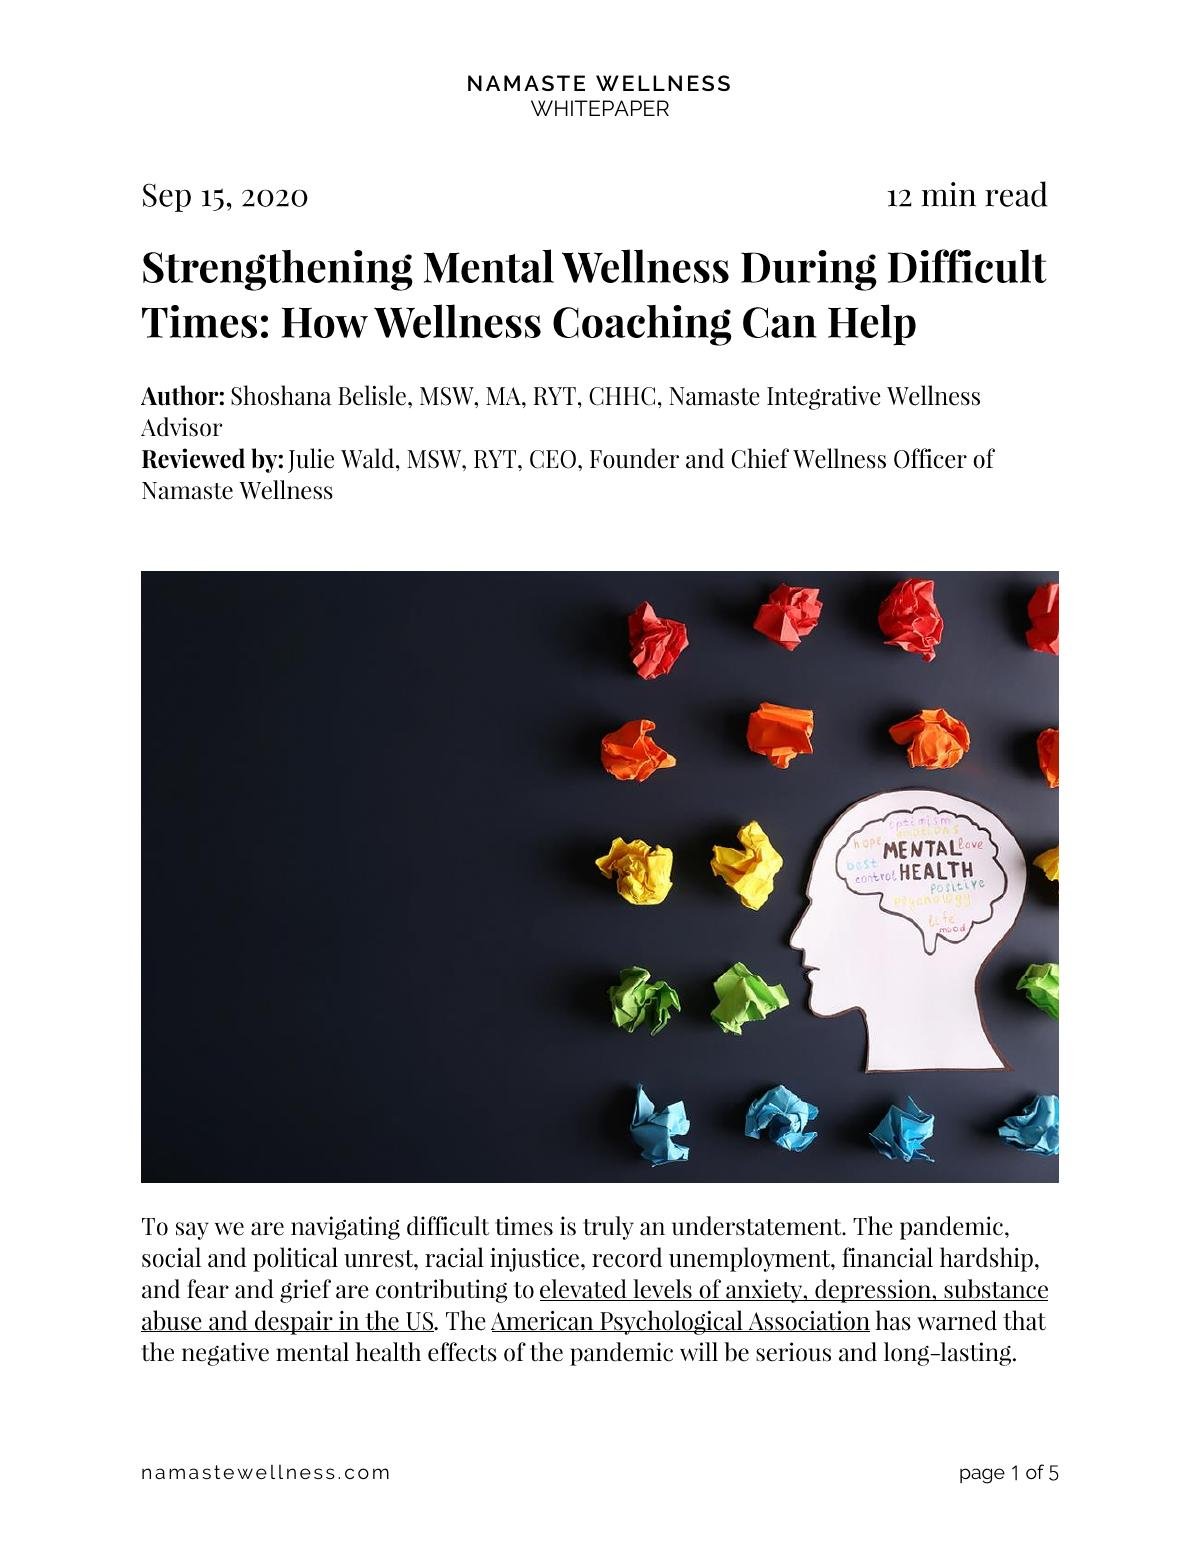 Strengthening Mental Wellness During Difficult Times - How Wellness Coaching Can Help